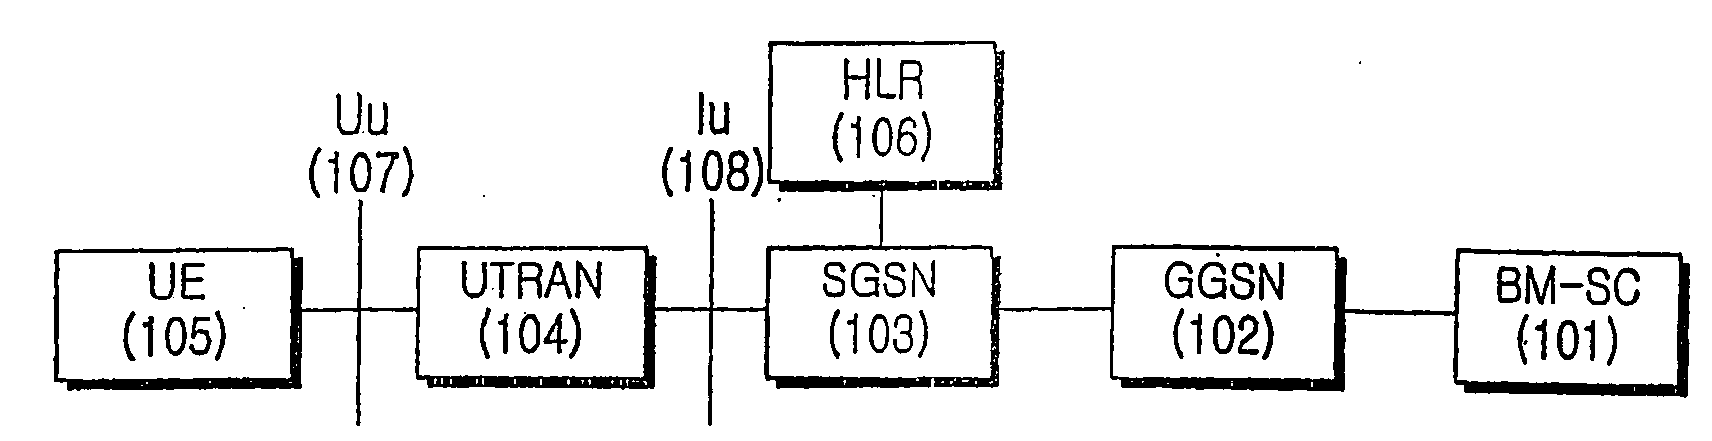 Method for supporting MBMS service transmission in LTE system